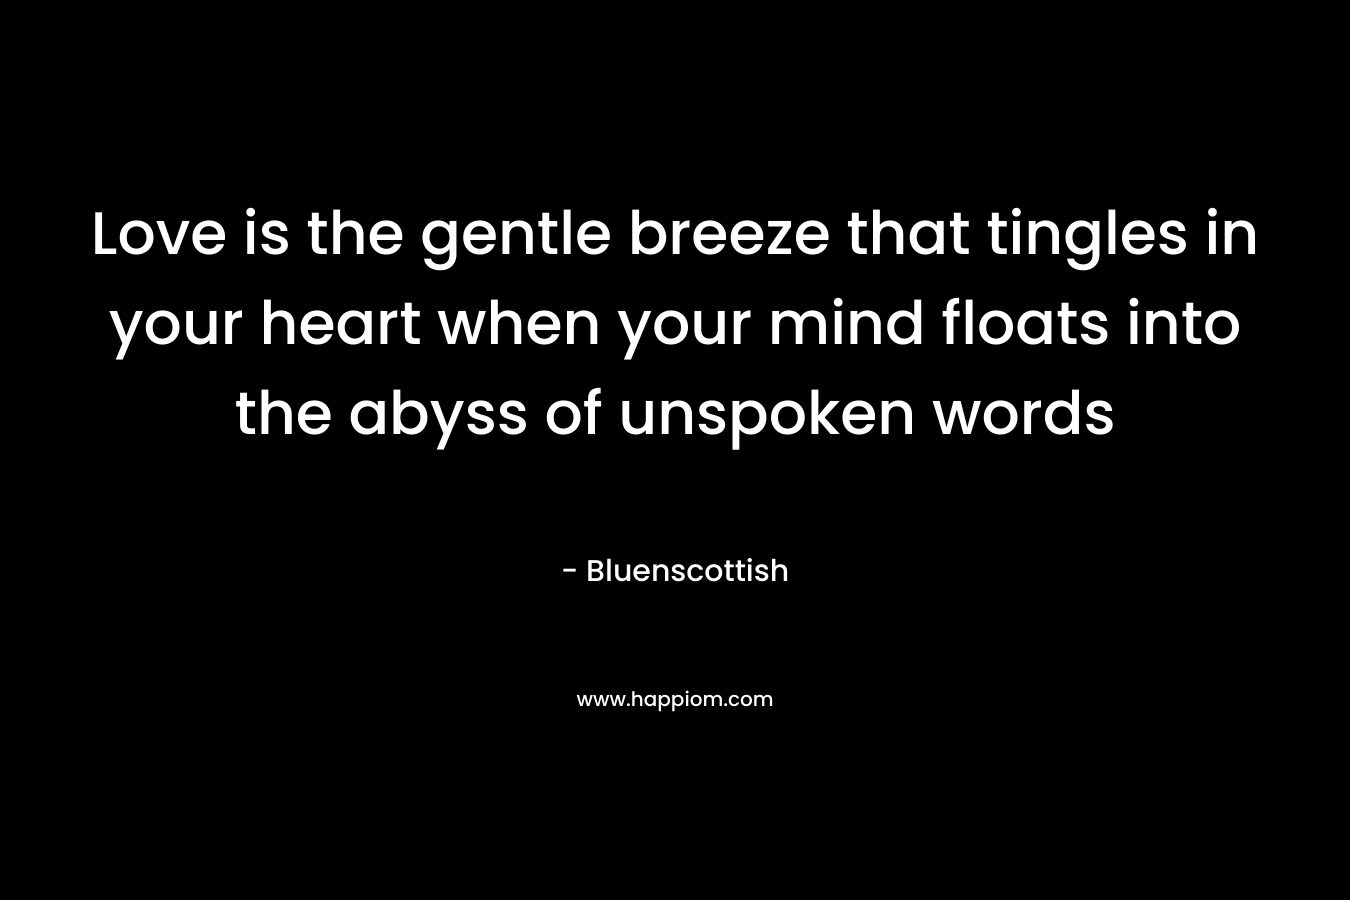 Love is the gentle breeze that tingles in your heart when your mind floats into the abyss of unspoken words